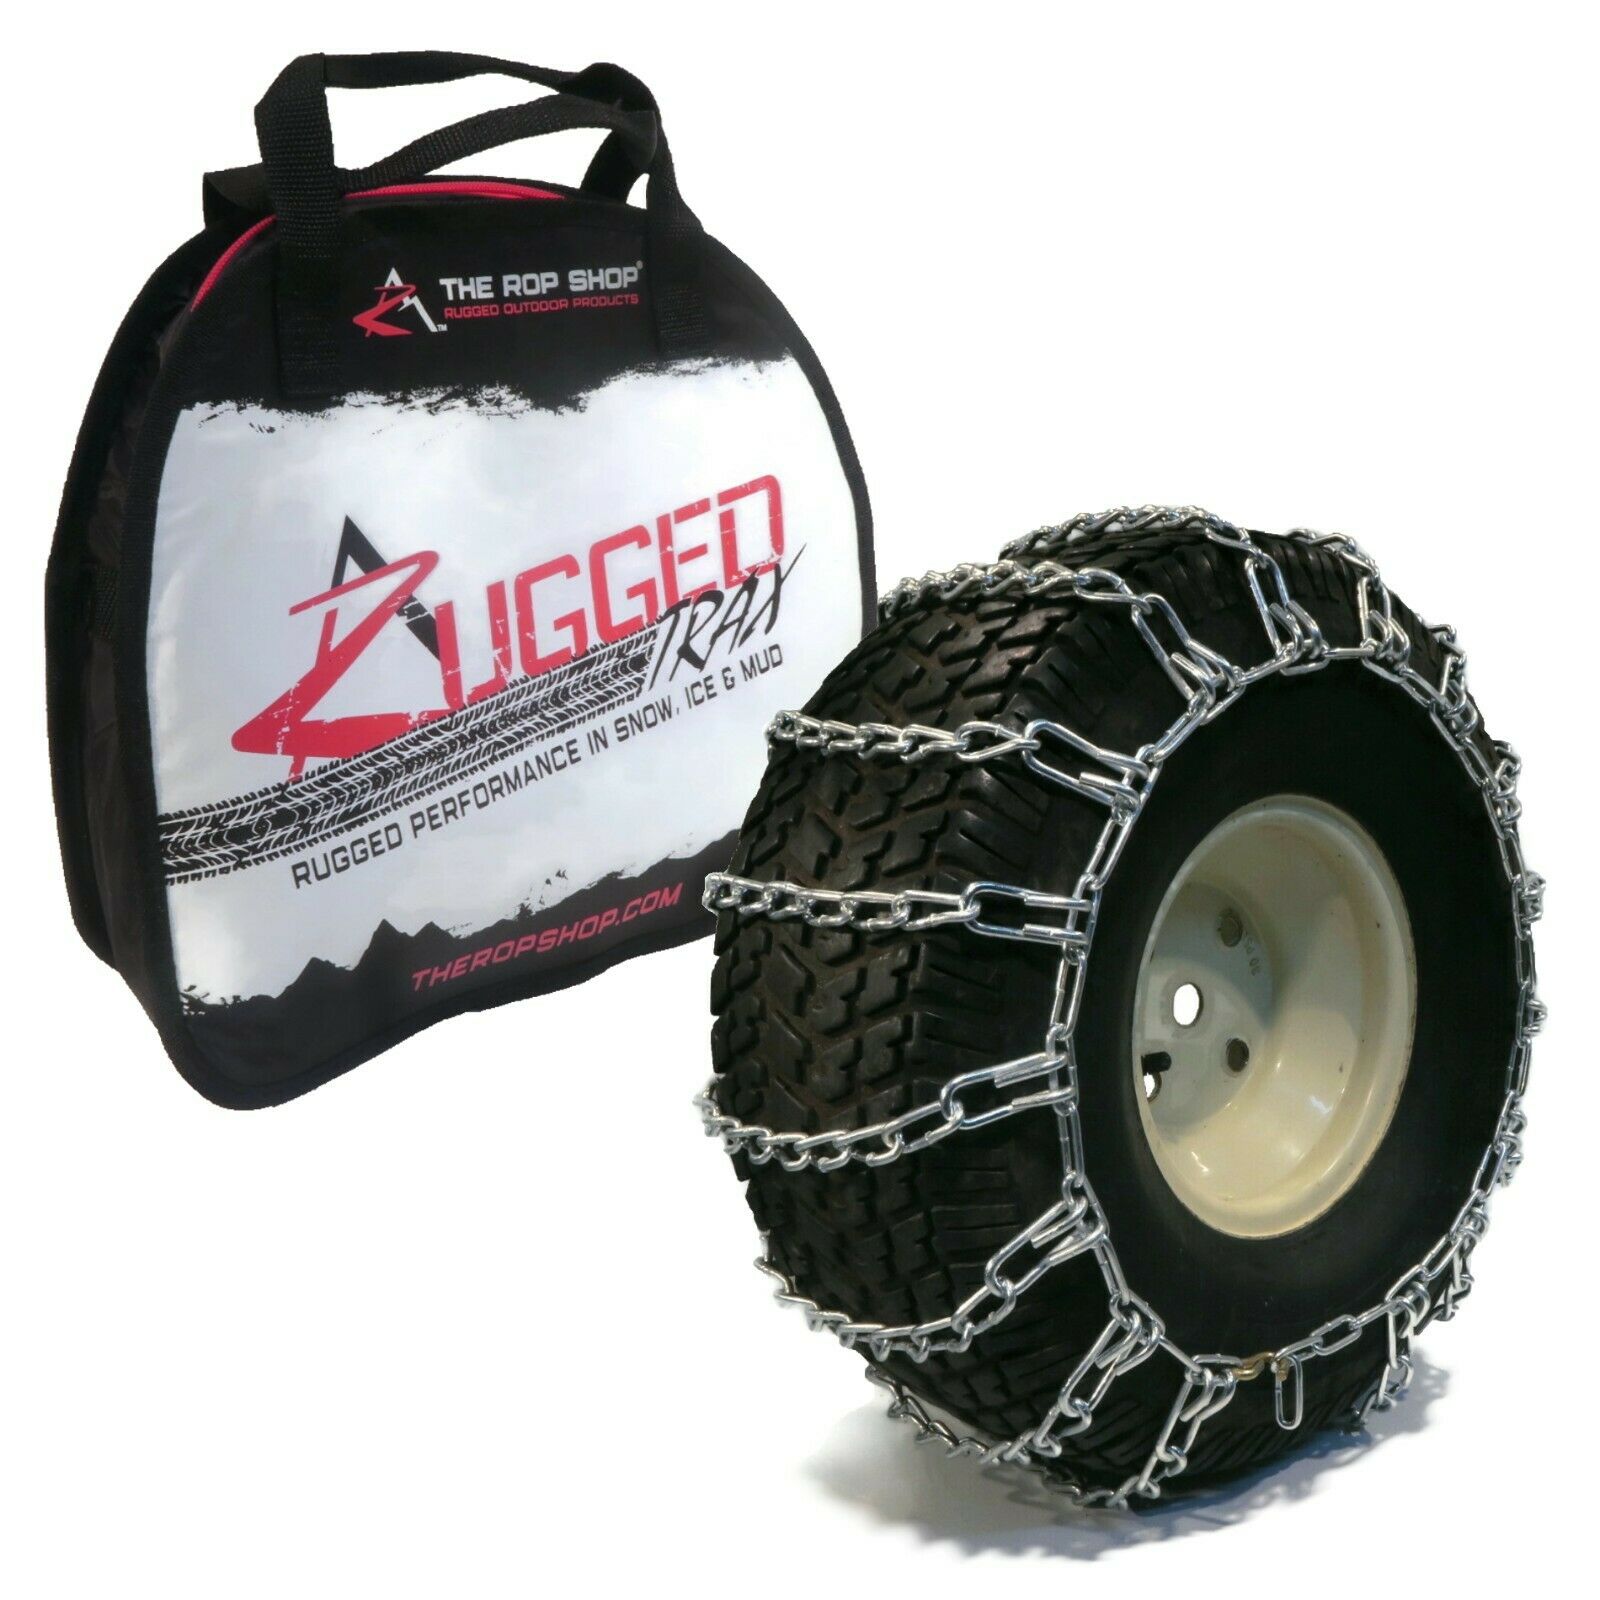 The ROP Shop | 26x12-12 Tire Chains 2 Link John Deere 400 & X Series Lawn Mower Tractor Rider - image 1 of 6